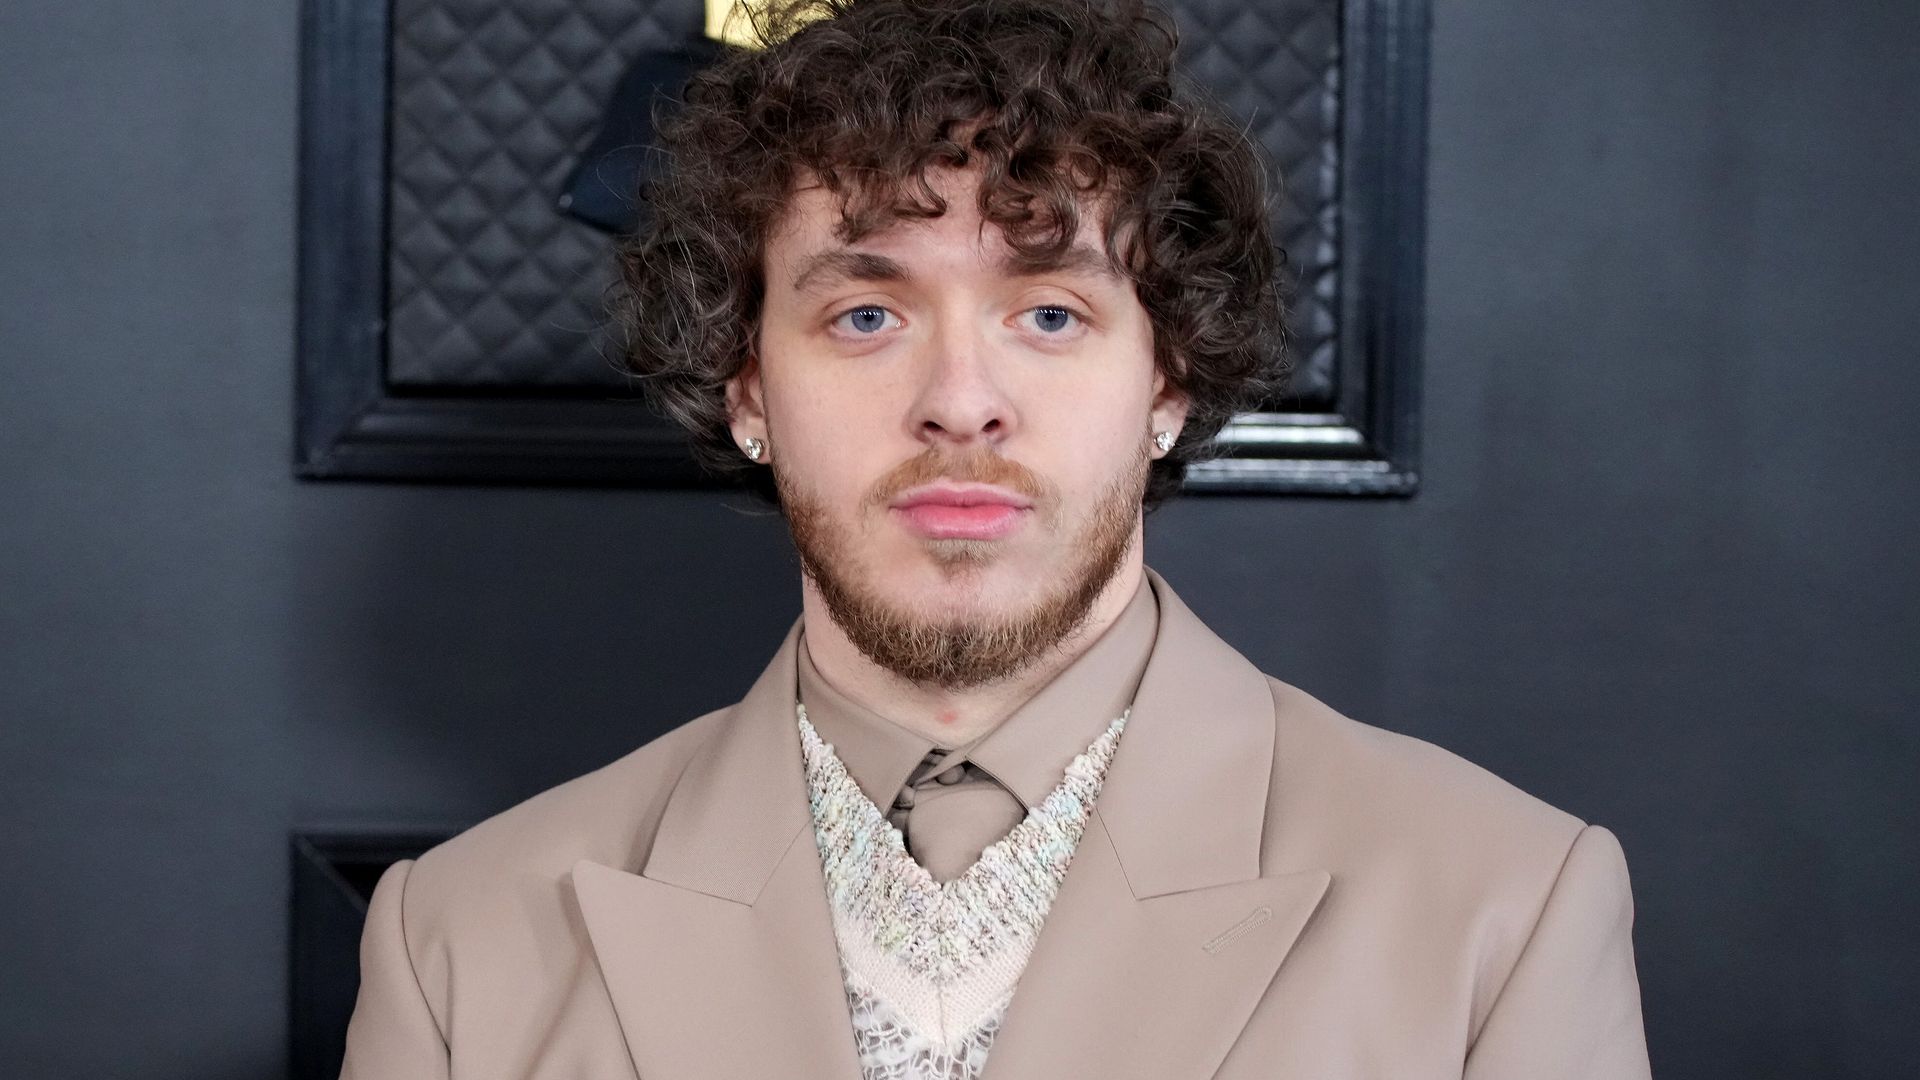 Jack Harlow at the Grammy Awards 2023